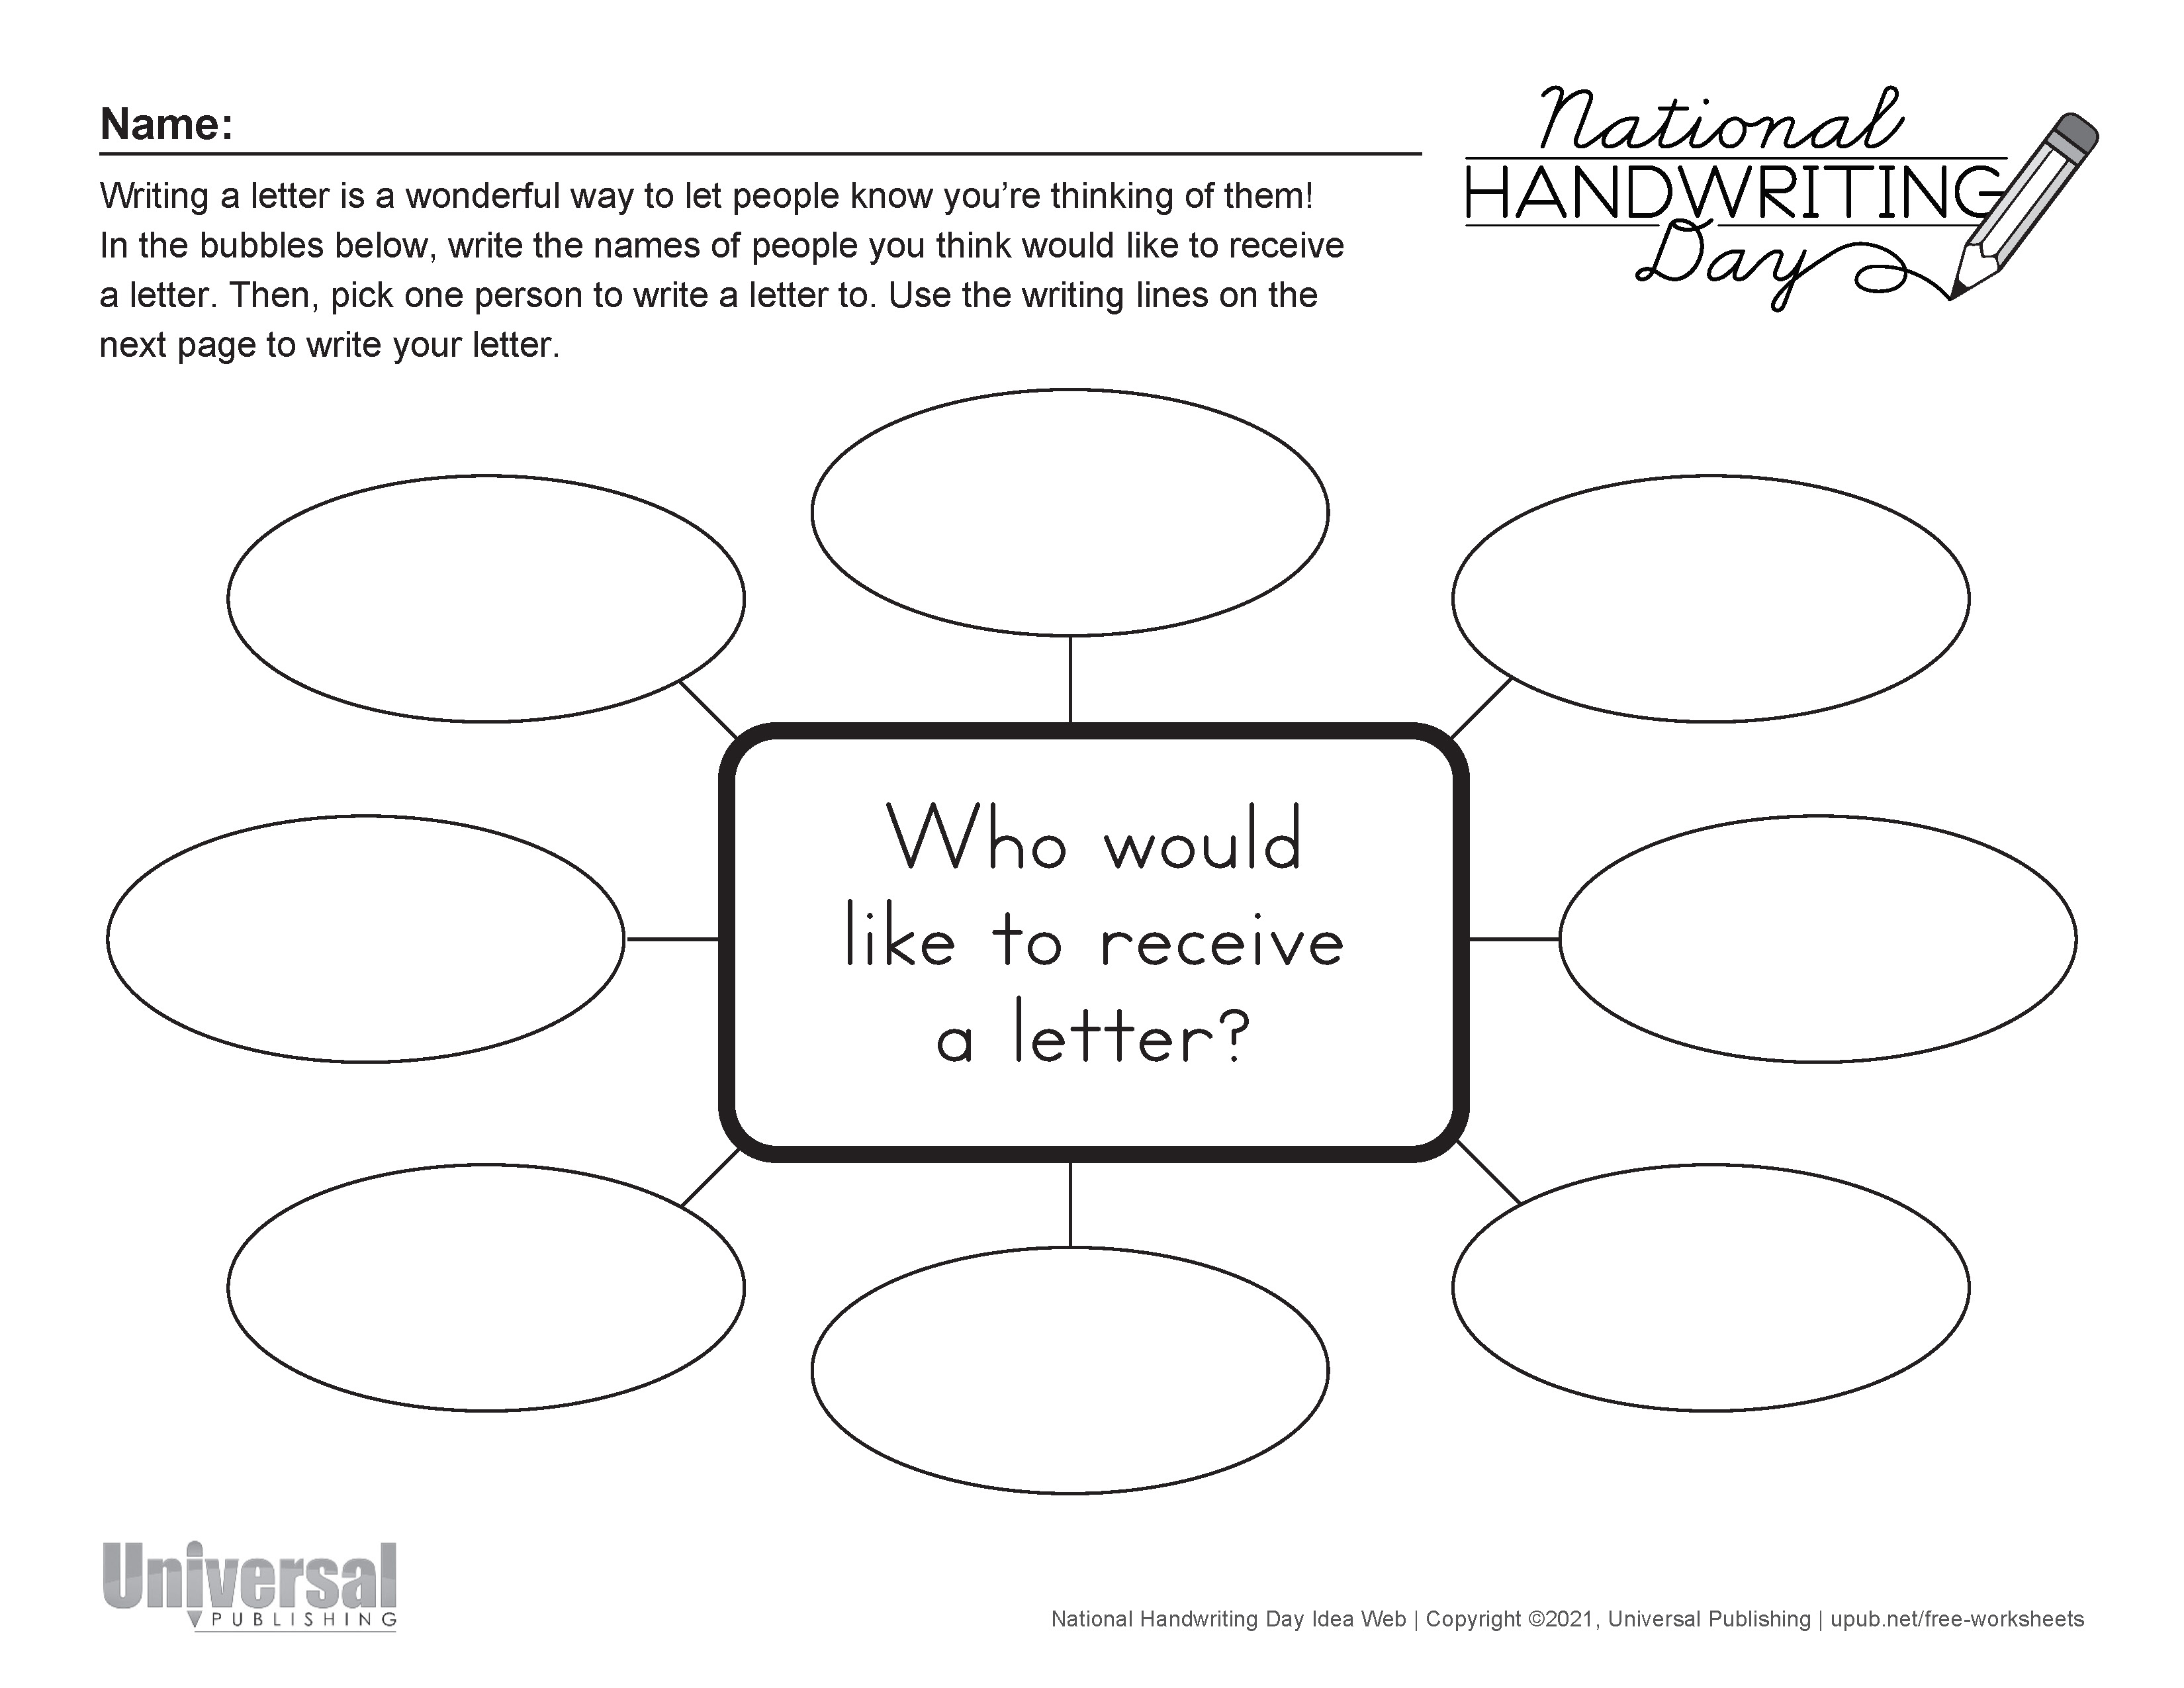 National Handwriting Day Write a Letter Idea Web